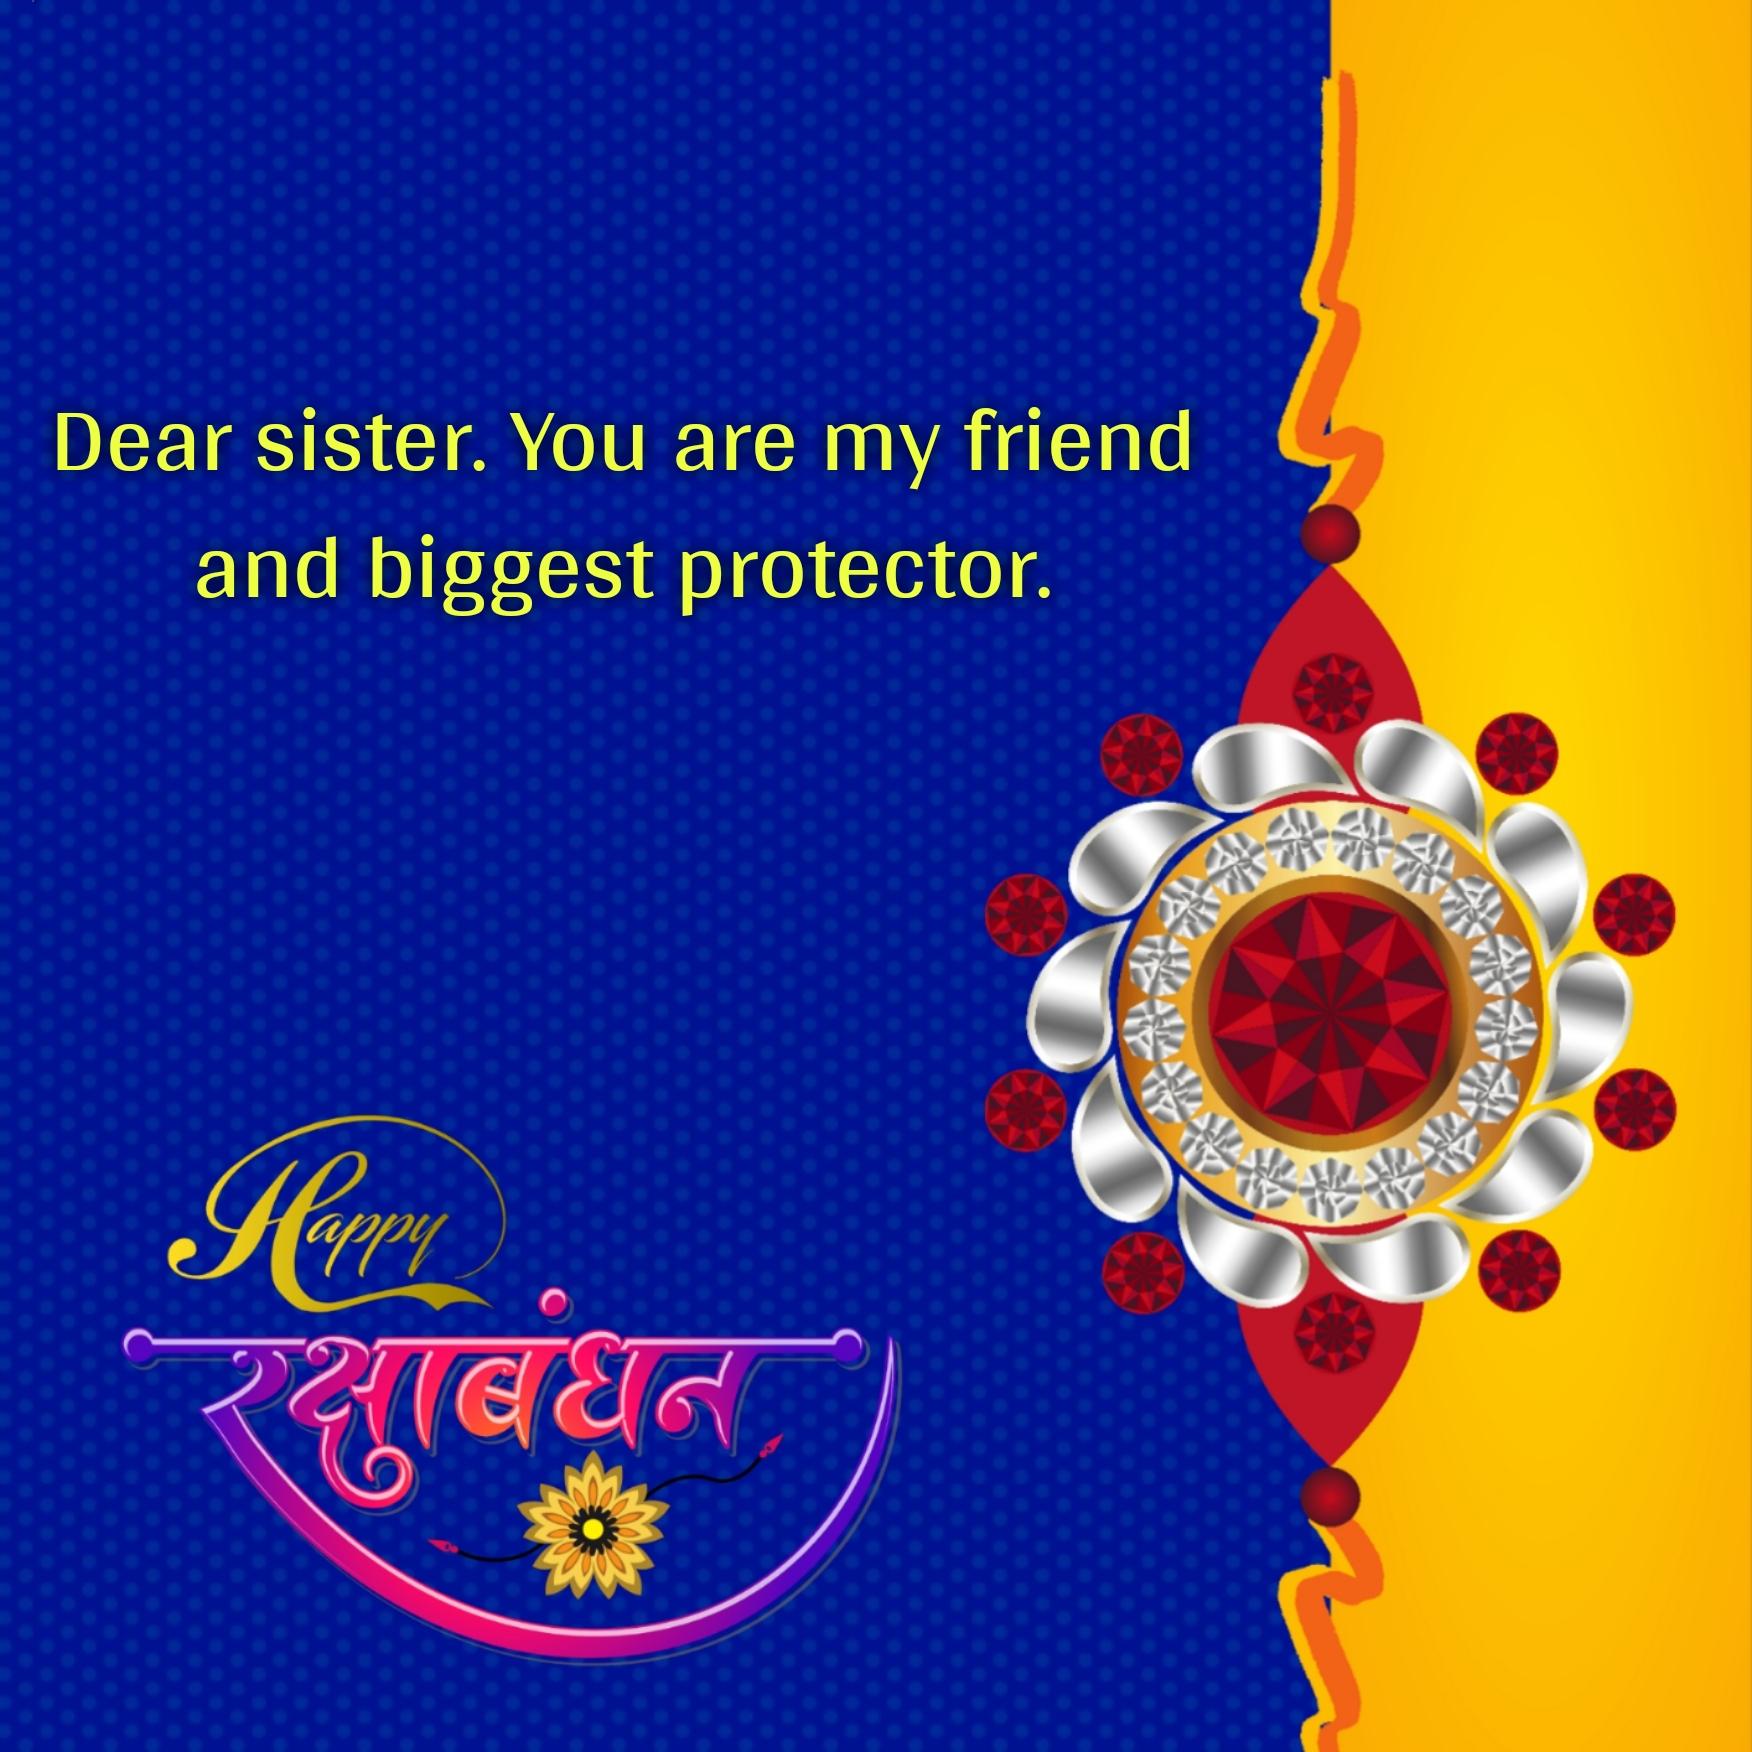 Dear sister You are my friend and biggest protector